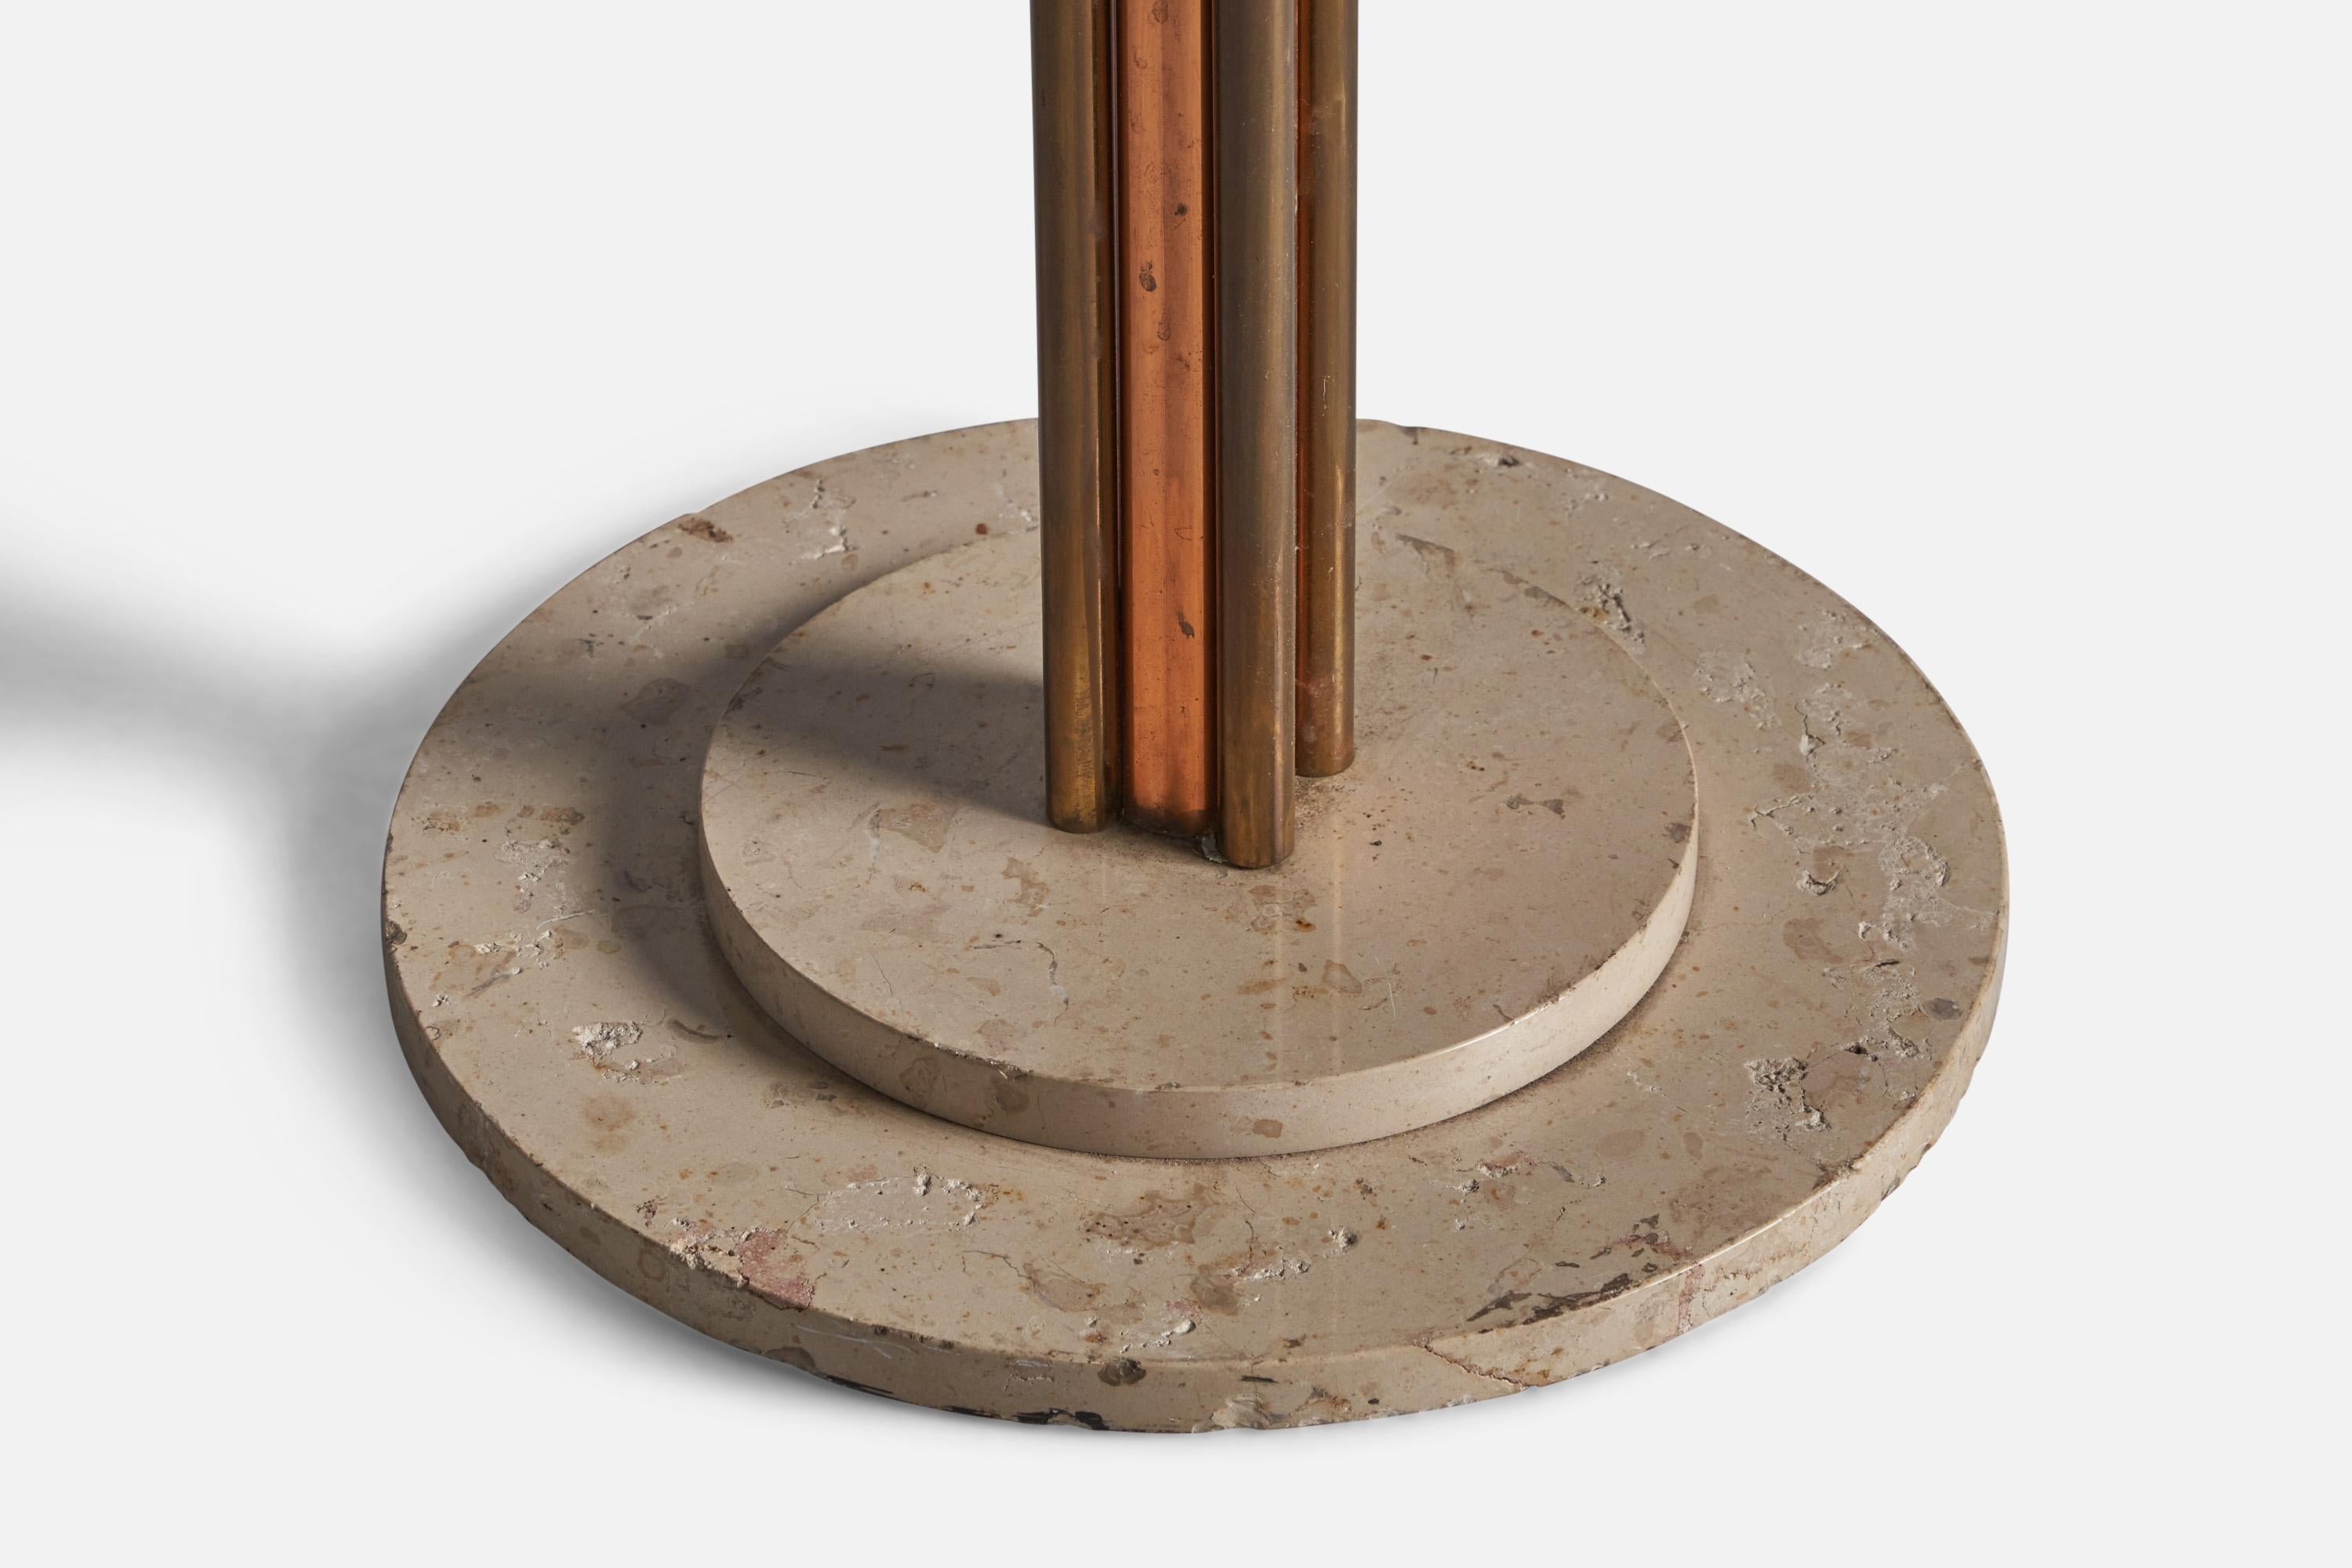 Italian Designer, Floor Lamp, Copper, Brass, Travertine, Italy, 1940s In Good Condition For Sale In High Point, NC